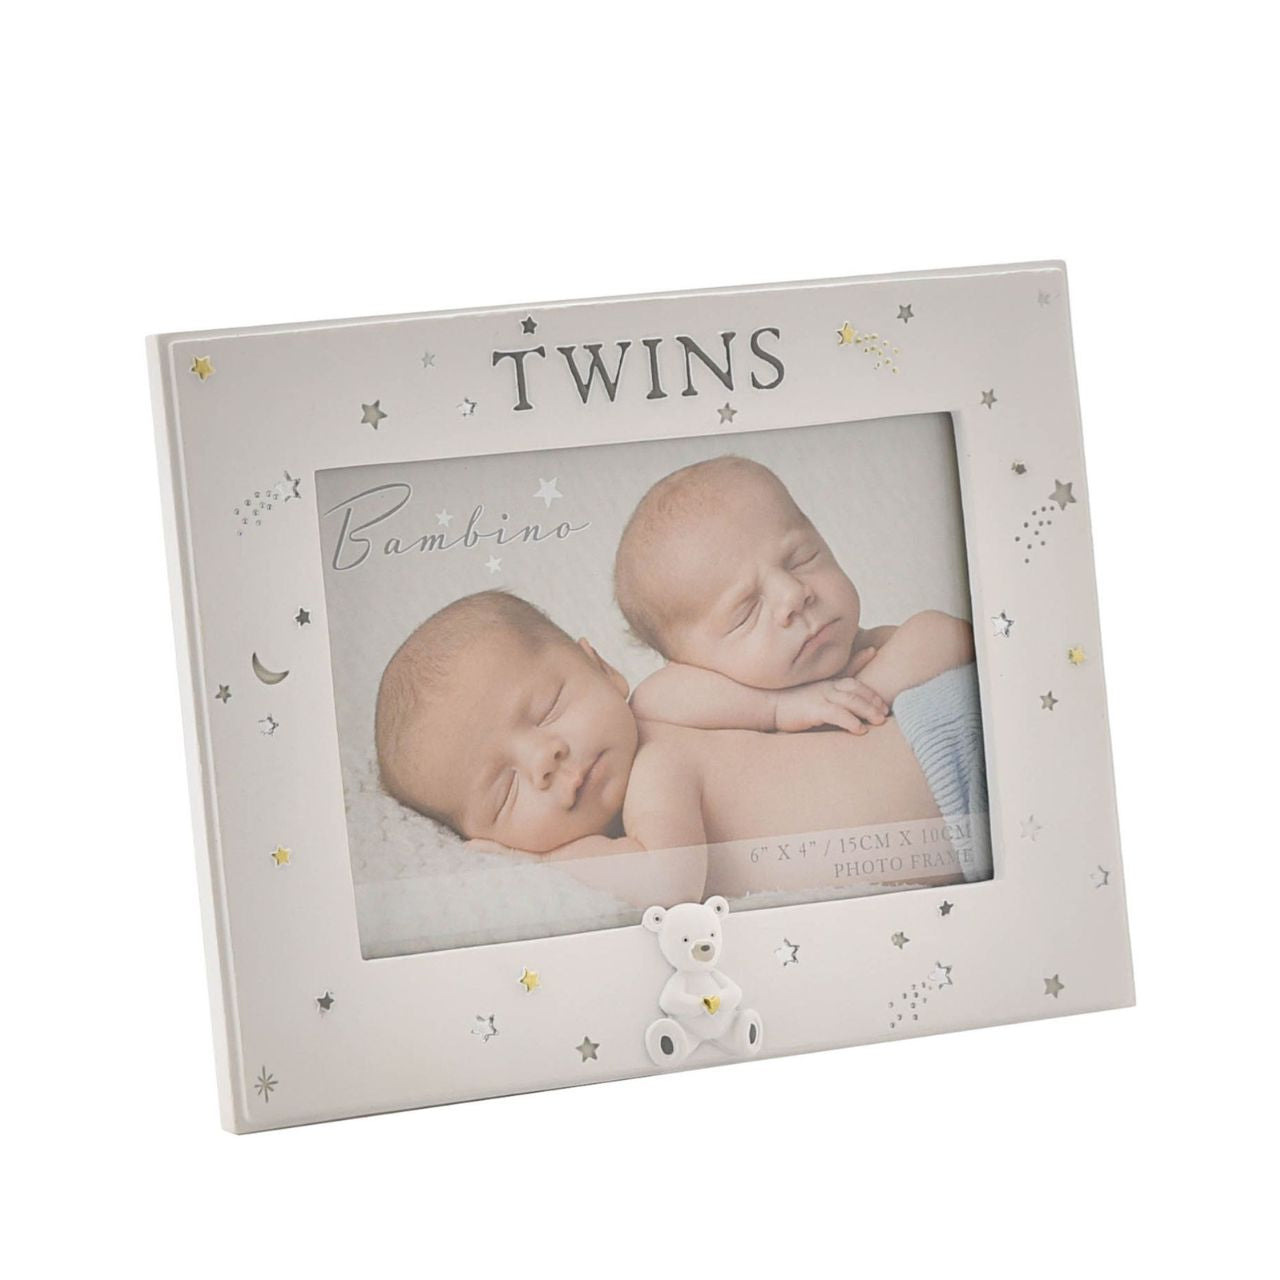 Bambino Twins Photo Frame 6" x 4"  Celebrate your beautiful new additions with this 6" x 4" 'Twins' landscape photo frame. From BAMBINO BY JULIANA Parents & Family - bringing families together over a precious new arrival.